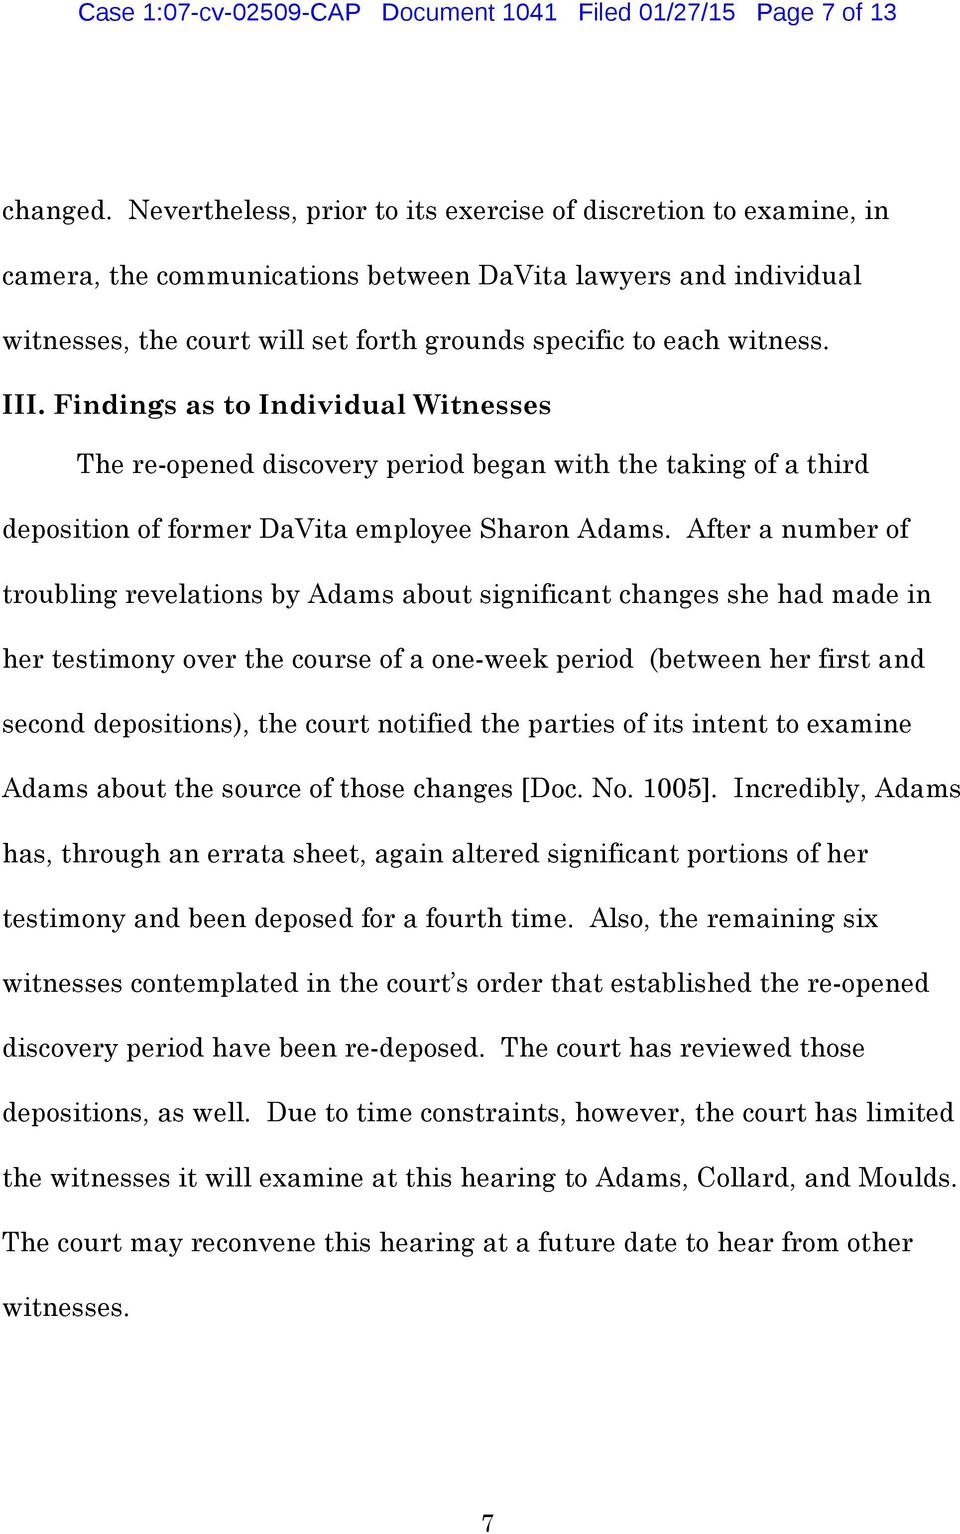 III. Findings as to Individual Witnesses The re-opened discovery period began with the taking of a third deposition of former DaVita employee Sharon Adams.